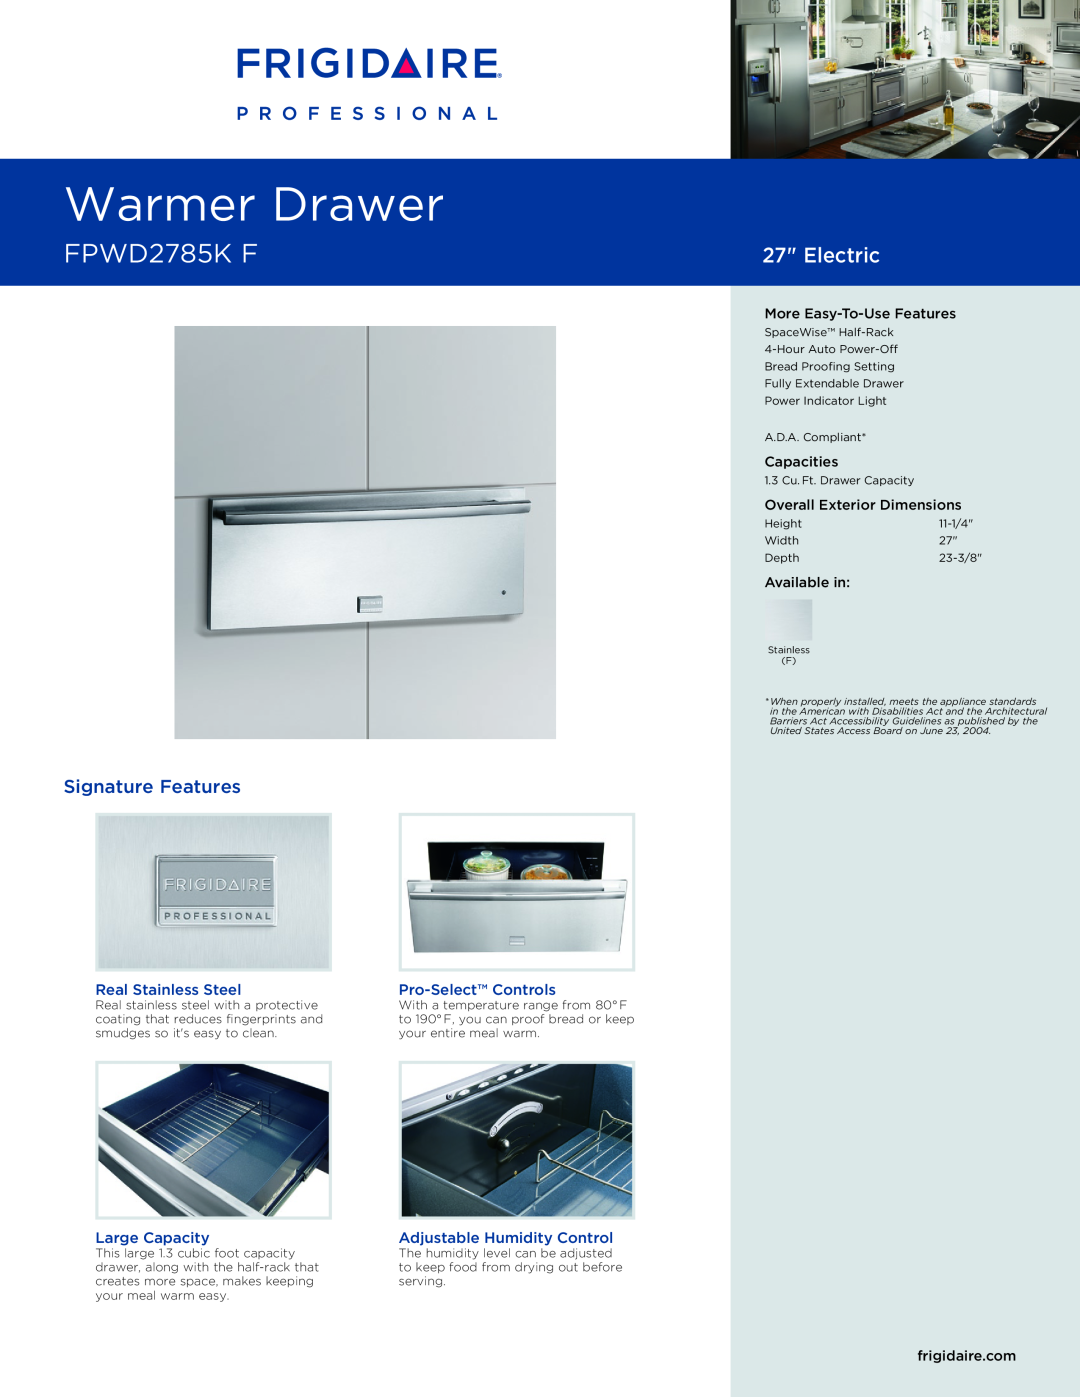 Frigidaire FPWD2785K dimensions Real Stainless Steel, Pro-SelectControls, Large Capacity, Adjustable Humidity Control 